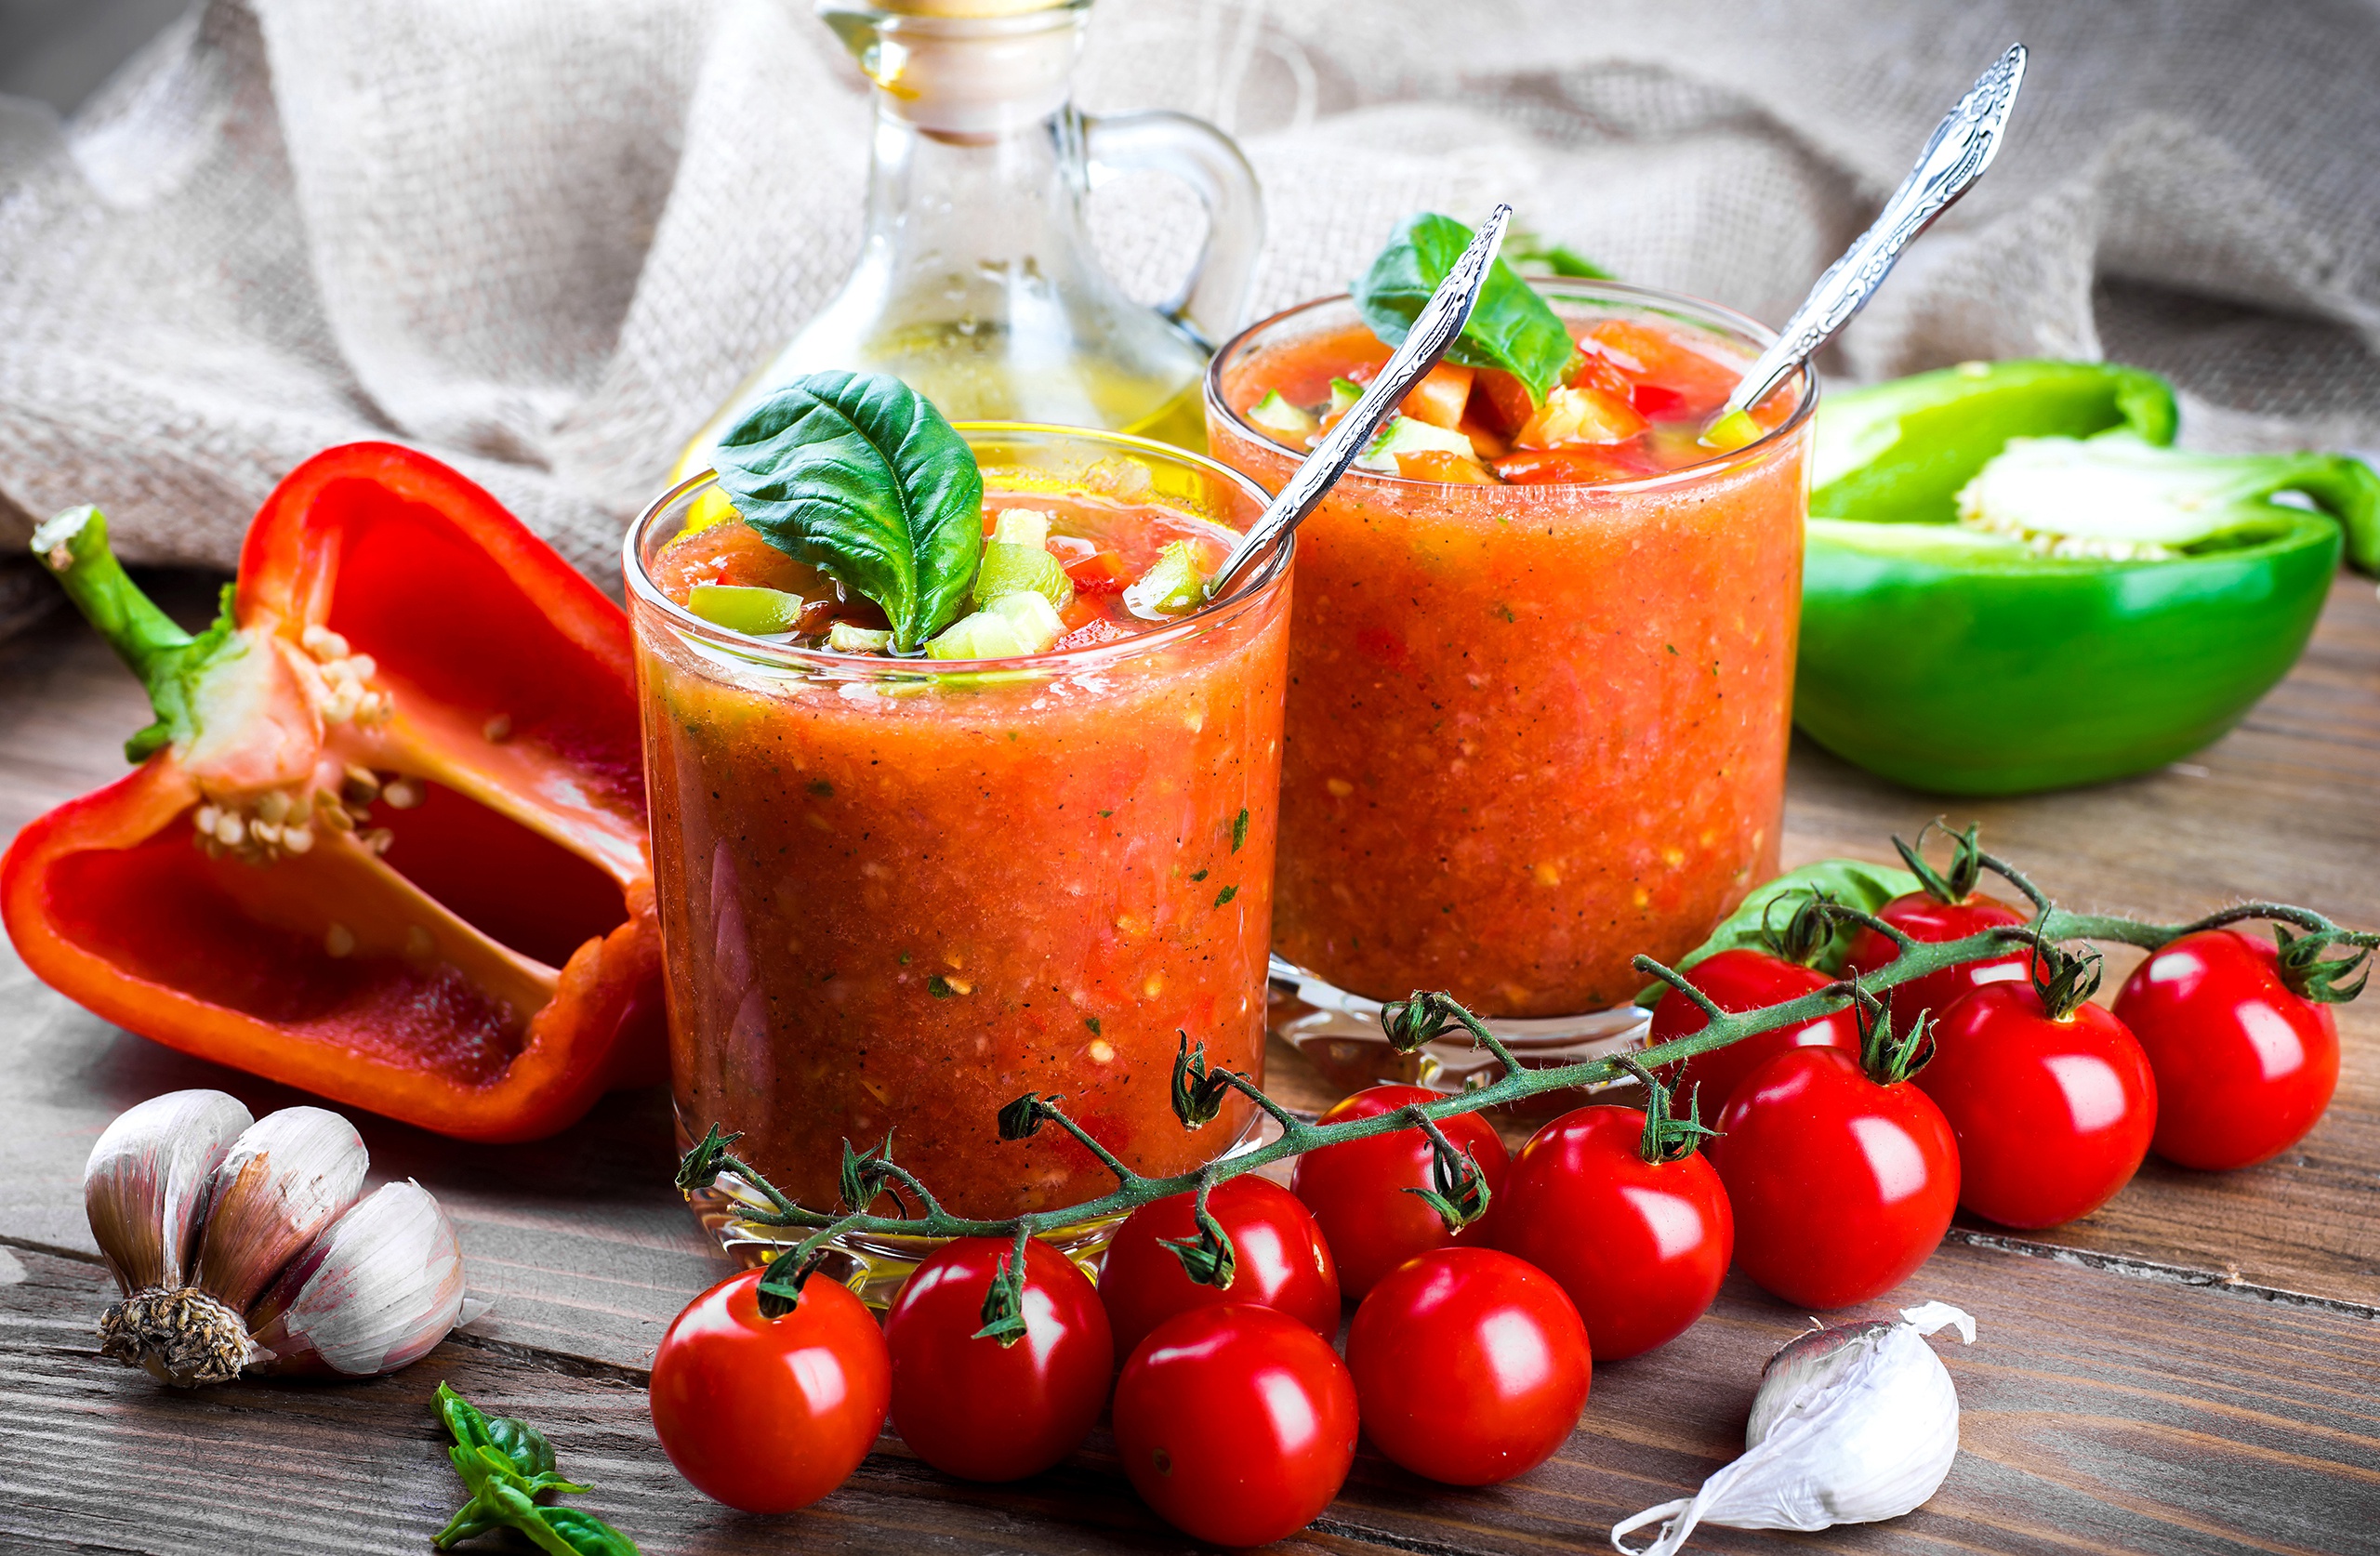 General 2560x1674 vegetables food Garlic tomatoes bell peppers soup basil olive oil wooden surface gazpacho